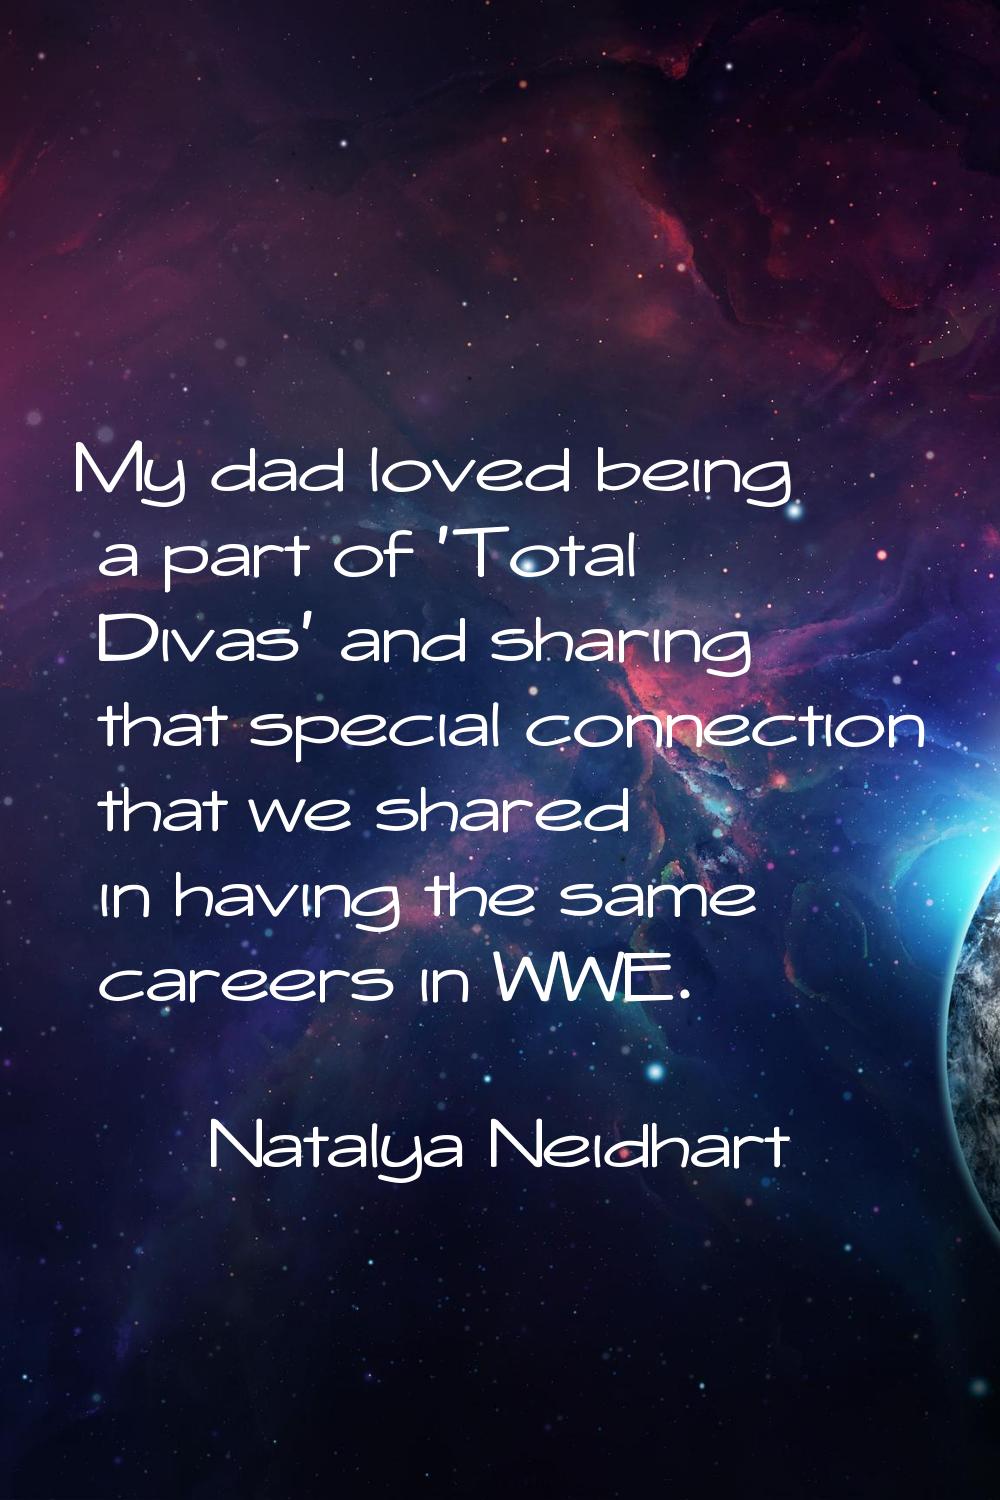 My dad loved being a part of 'Total Divas' and sharing that special connection that we shared in ha